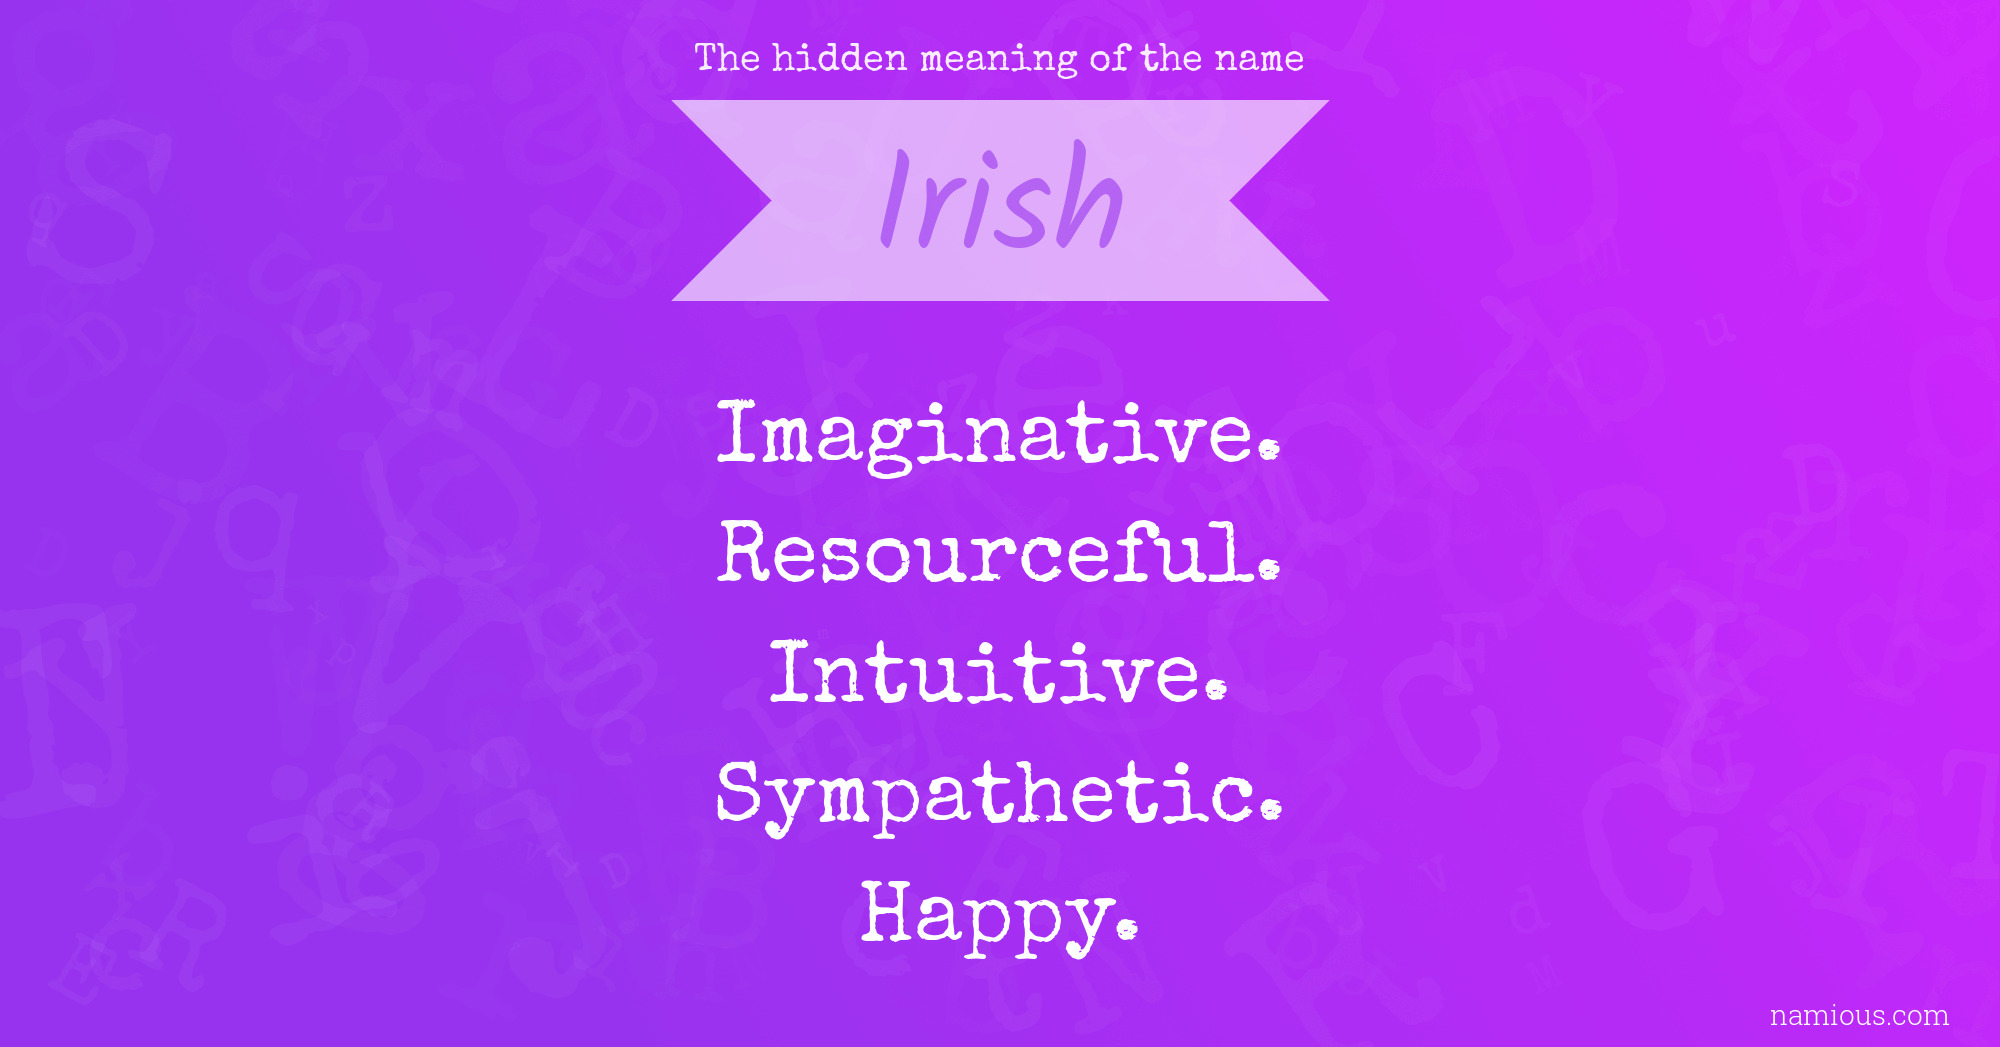 The hidden meaning of the name Irish